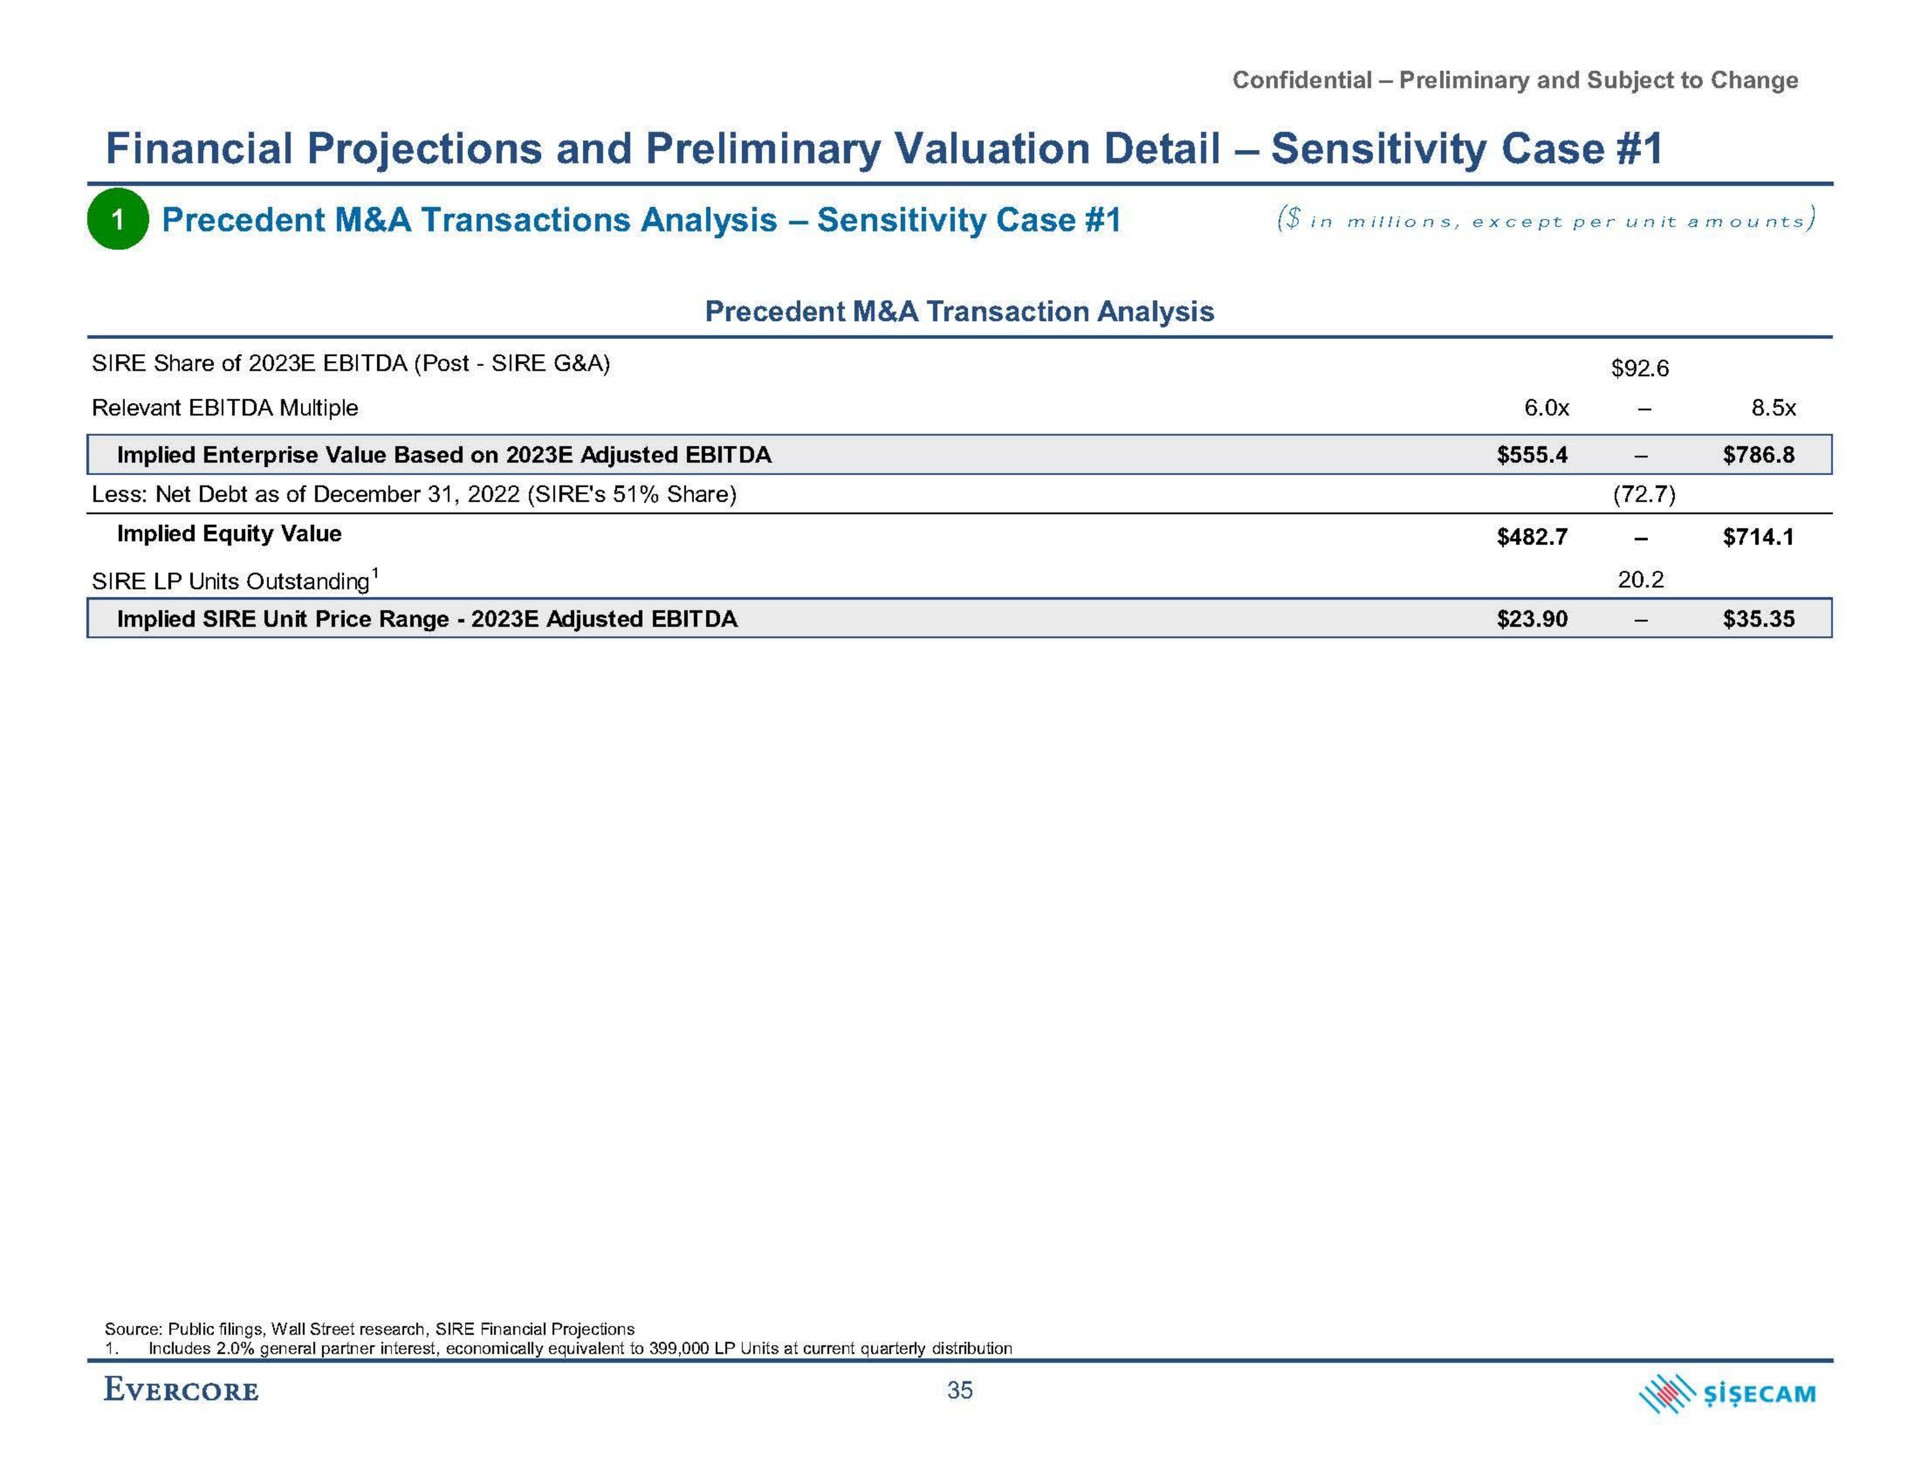 financial projections and preliminary valuation detail sensitivity case precedent a transactions analysis sensitivity case in except per unit amounts | Evercore